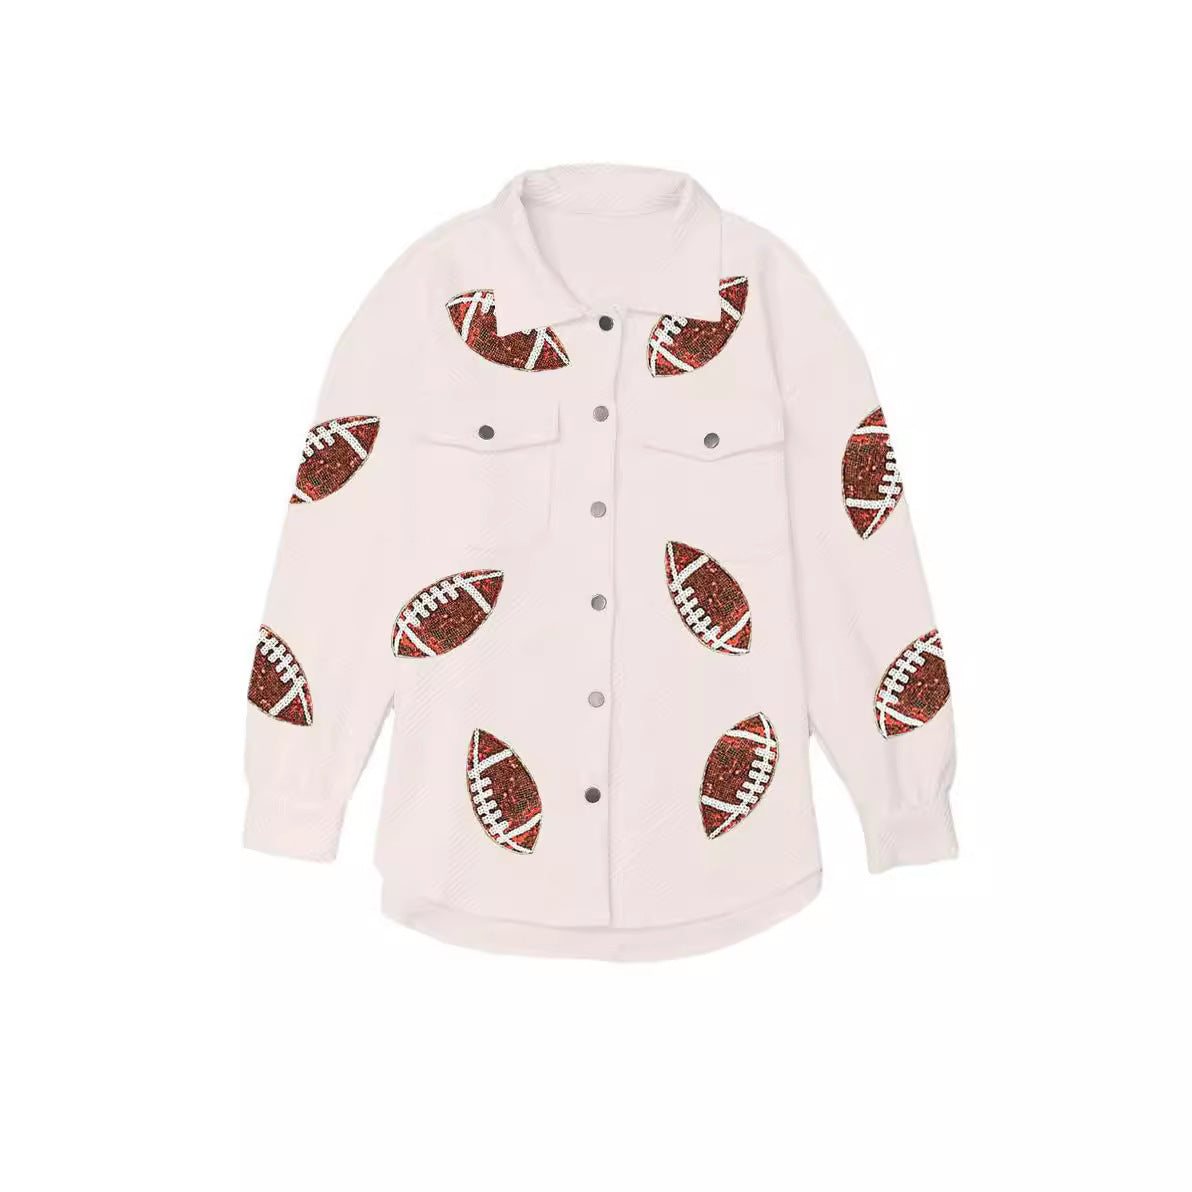 Cool Rugby Stitching Printing Fashionable Lining Coats